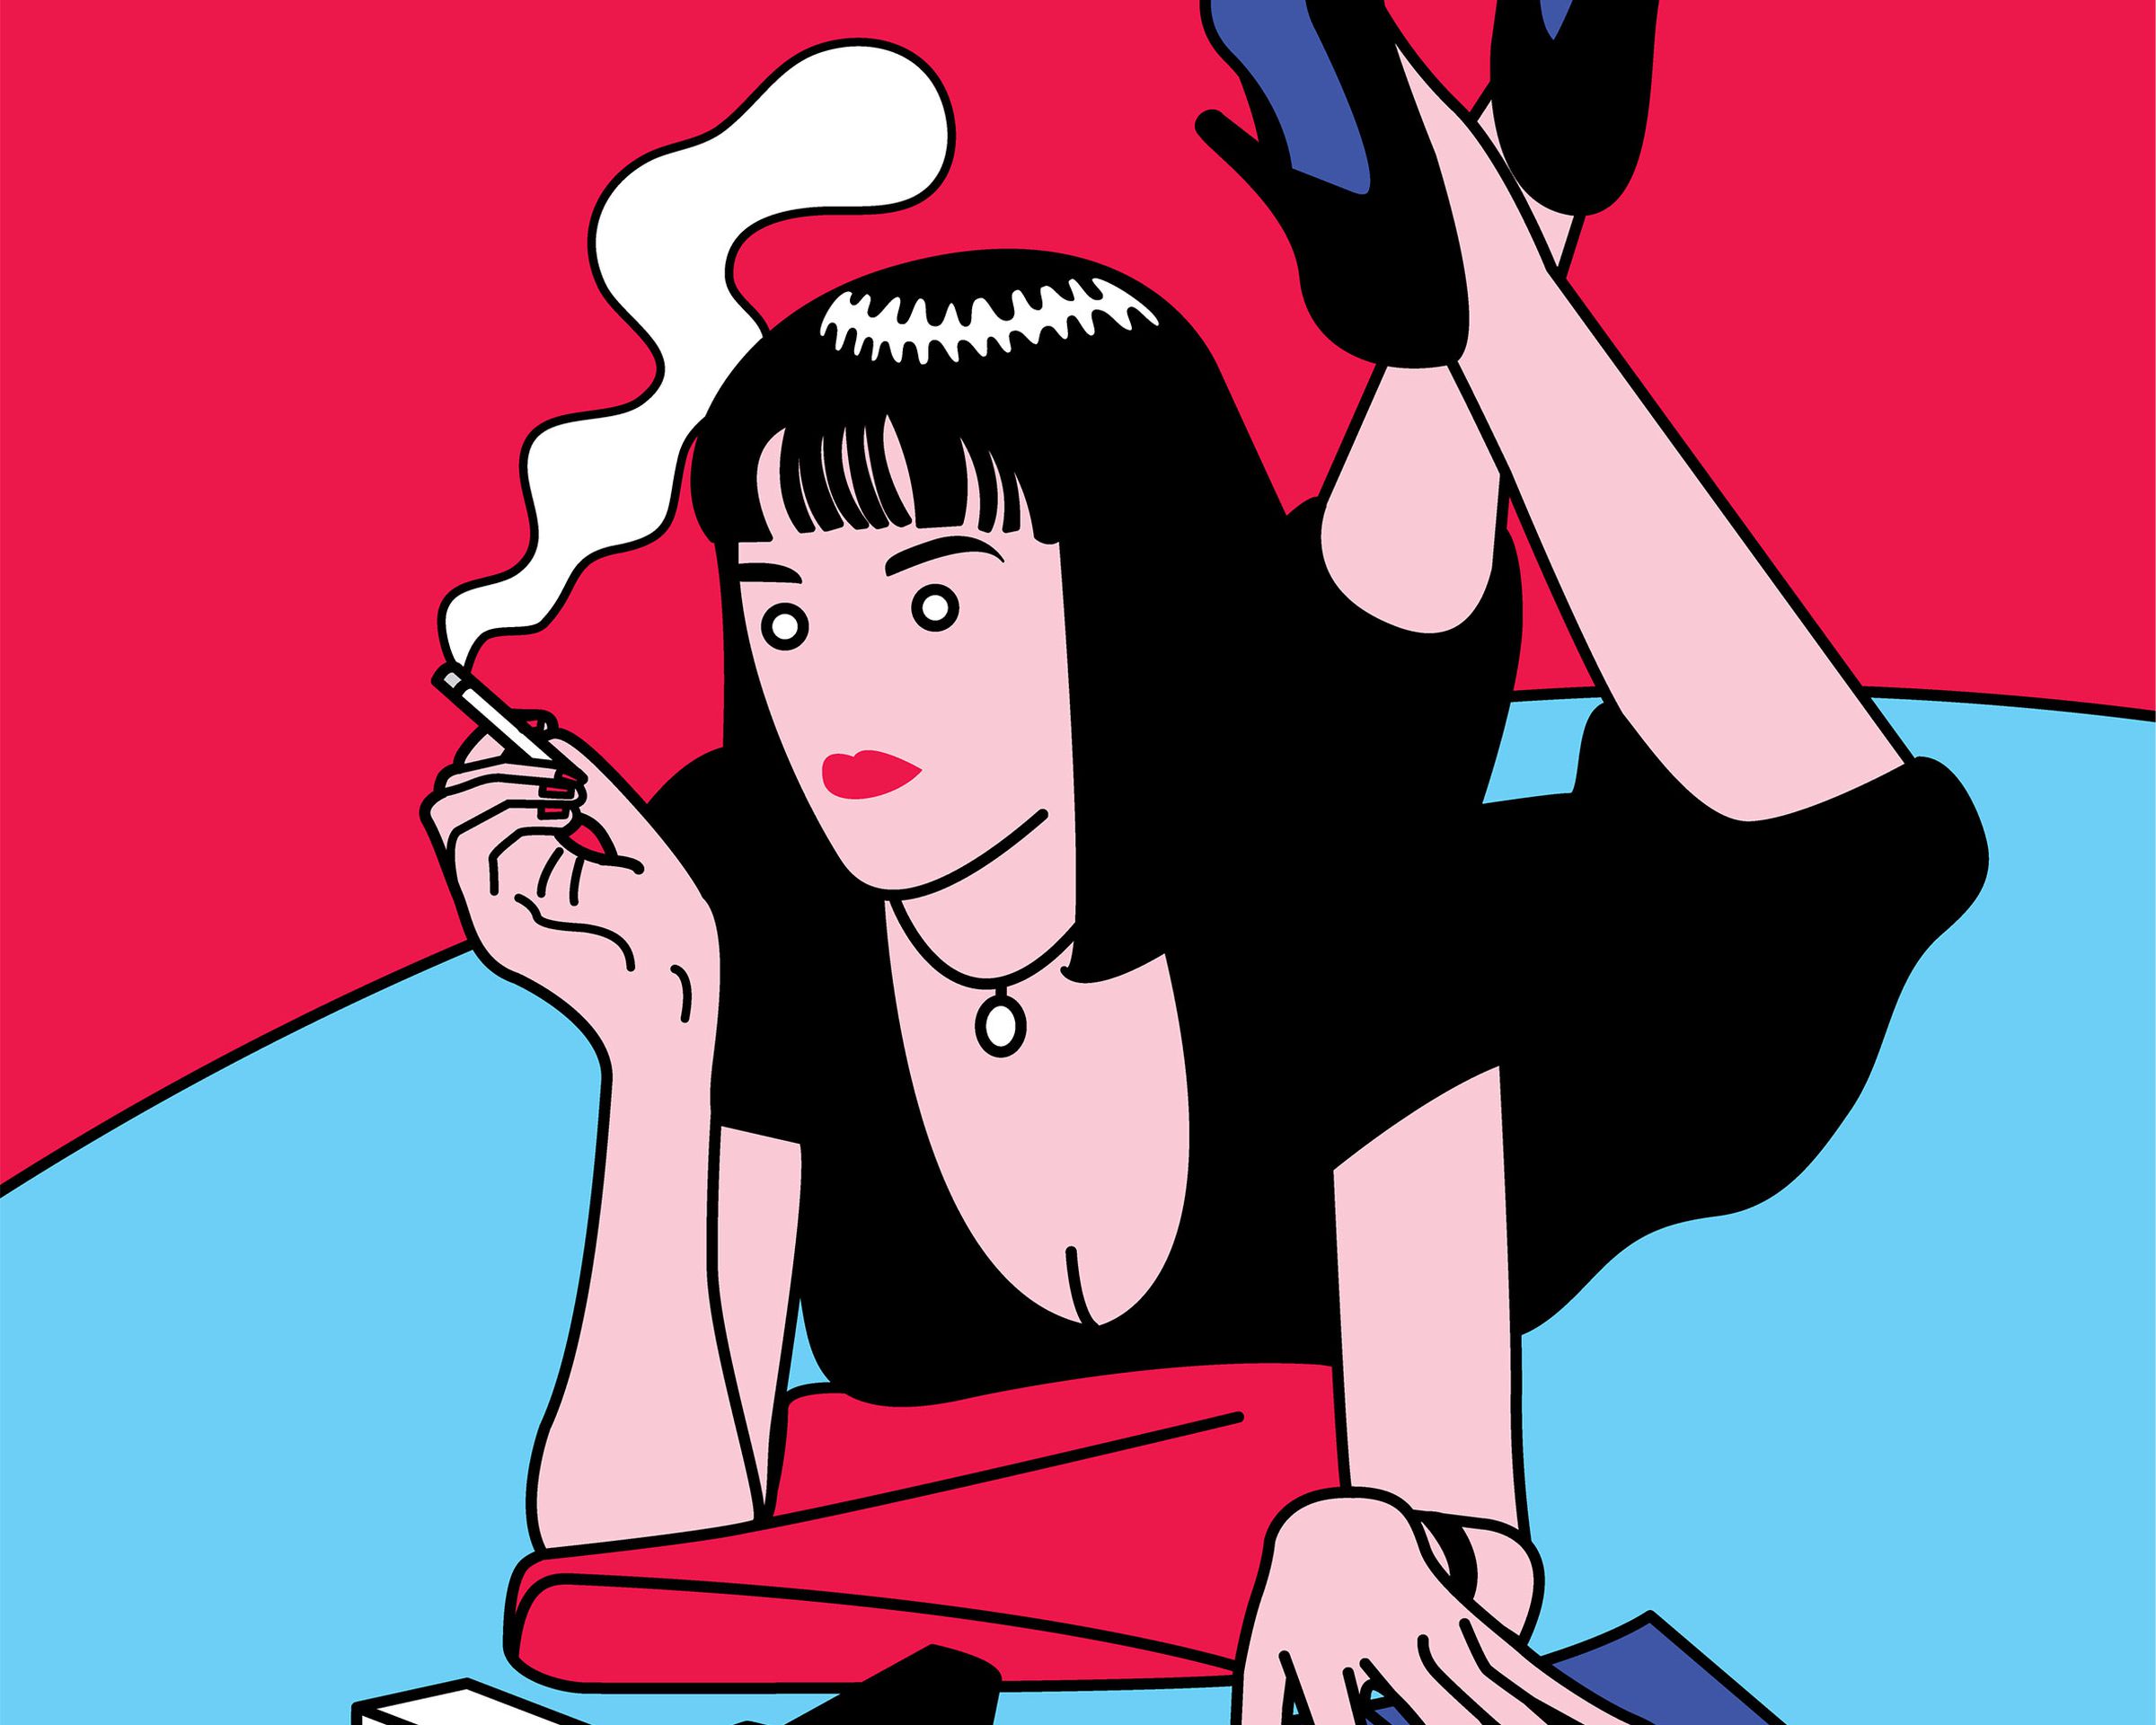 A cartoon drawing based on Uma Thurman in Pulp Fiction. She is laying on her stomach with her legs crossed behind her as she smokes a cigarette.